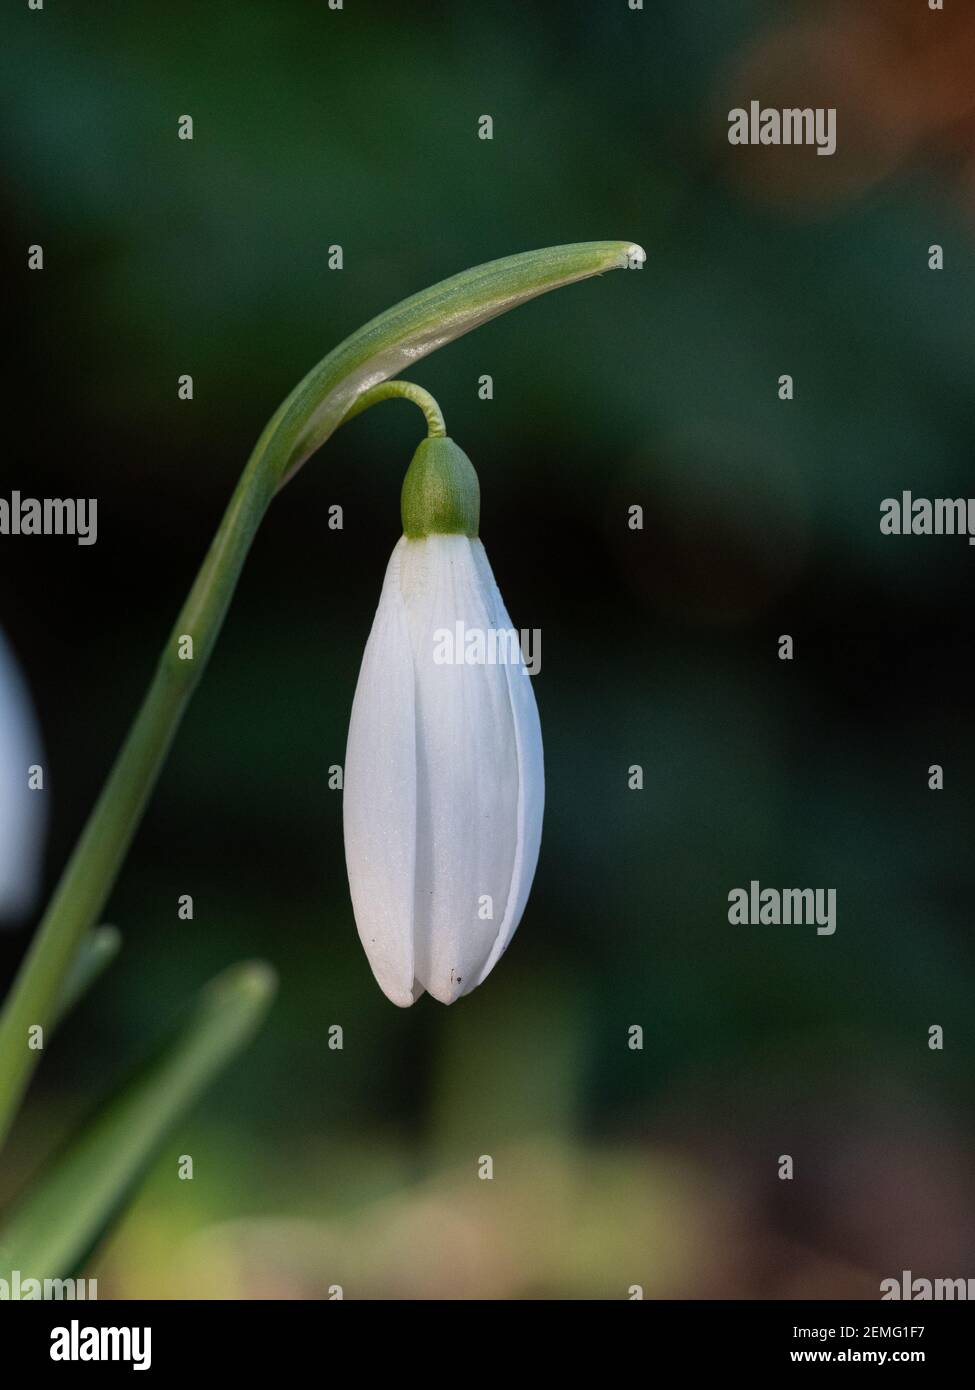 A close up of a single bud of the common snowdrop Galanthus nivalis Stock Photo